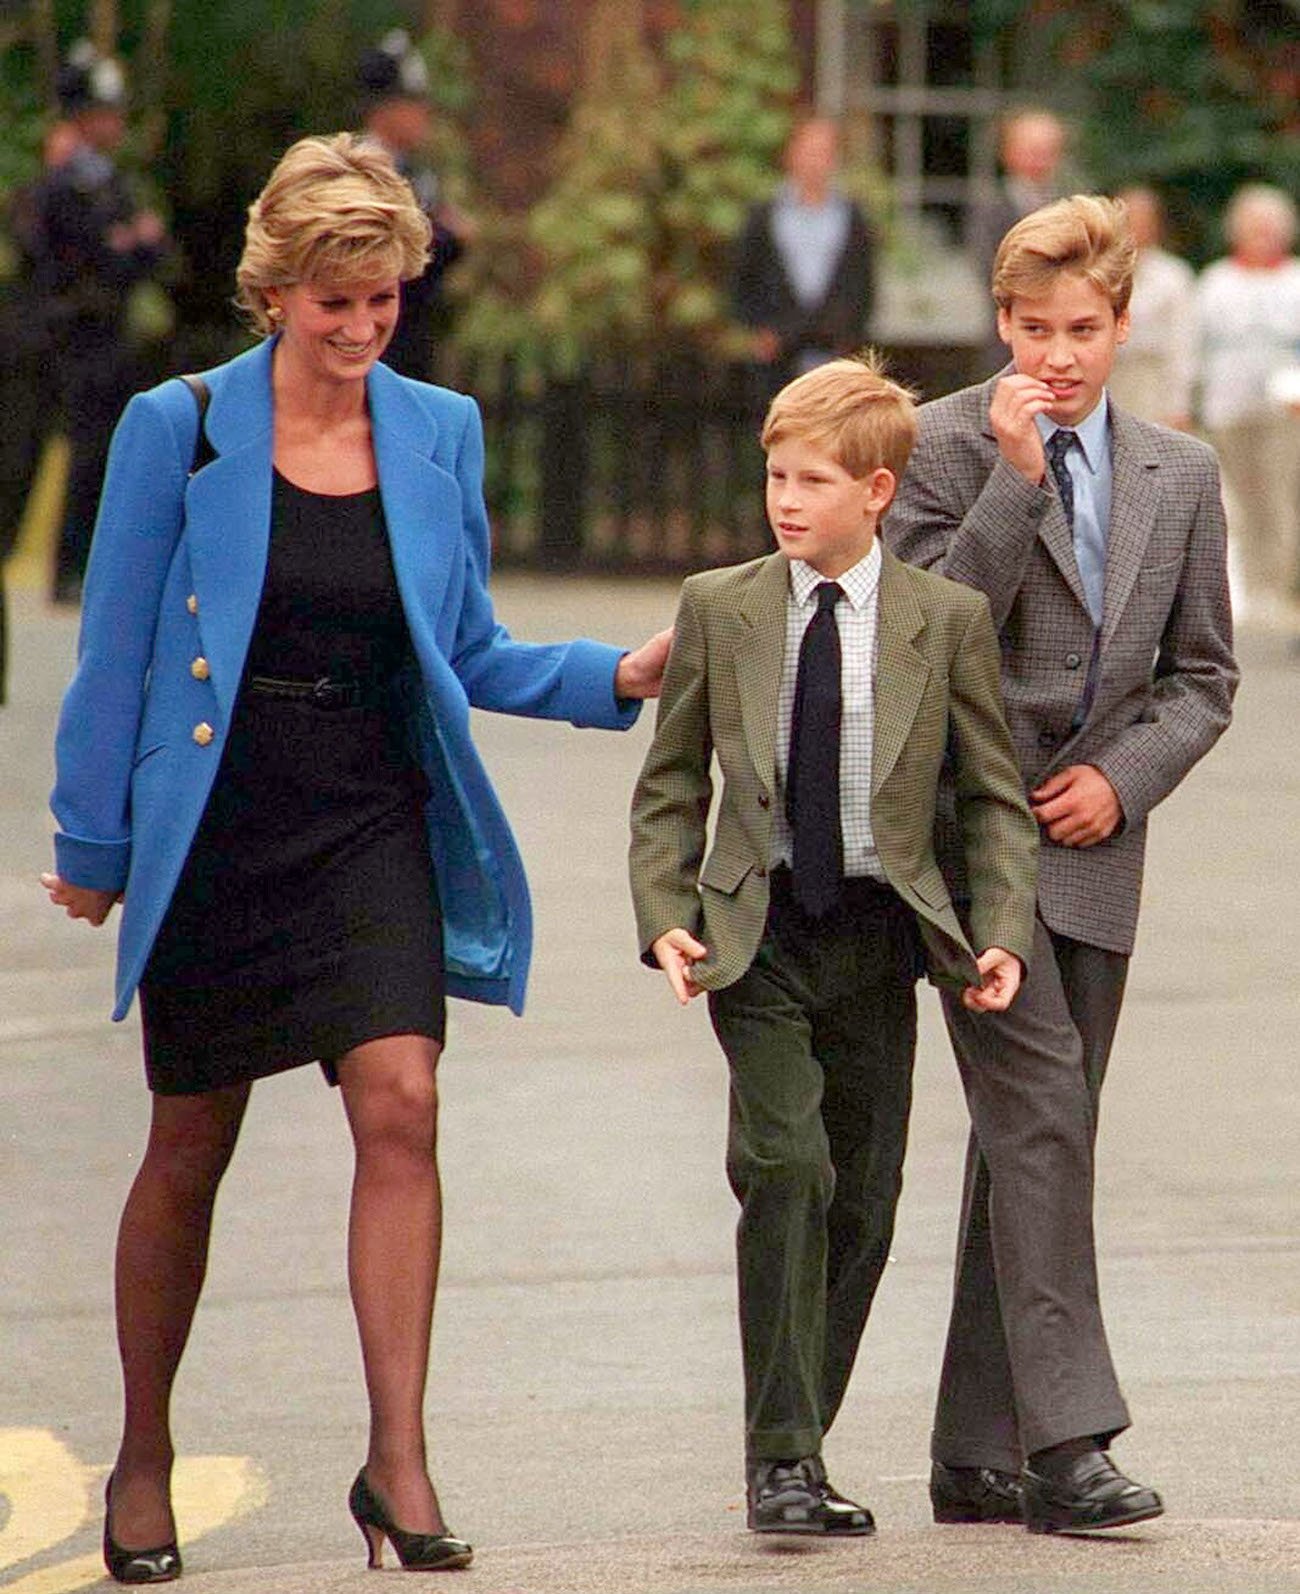 Princess Diana puts her arm on Prince Harry's shoulder as Prince William walks along